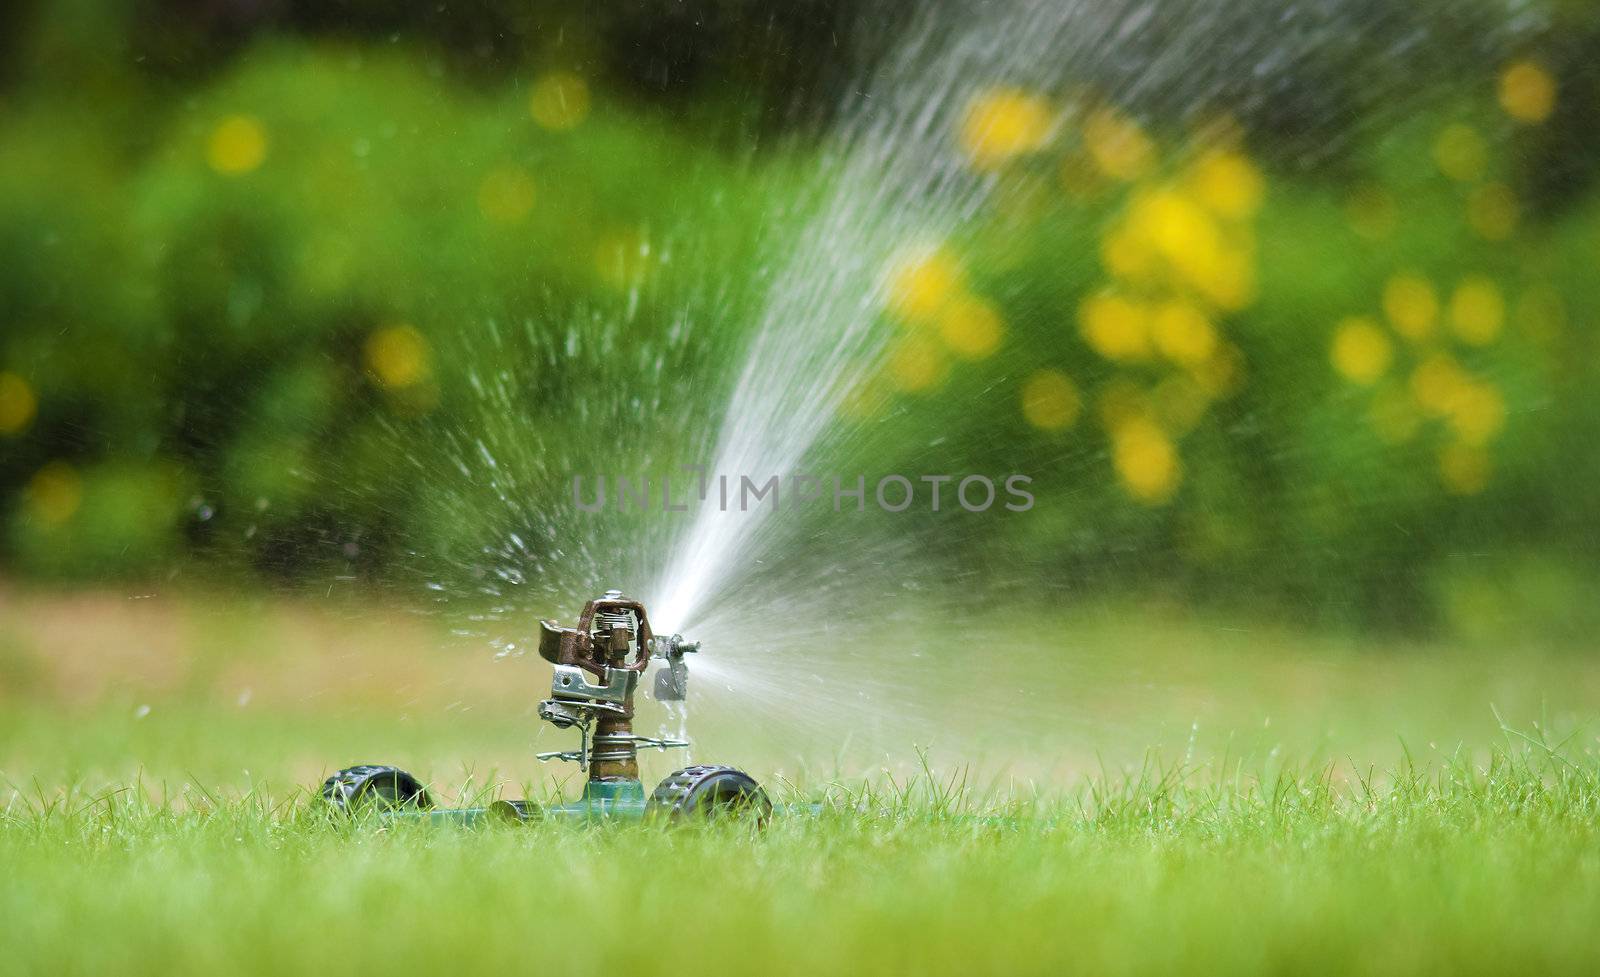 Sprinkler watering the lawn by f/2sumicron